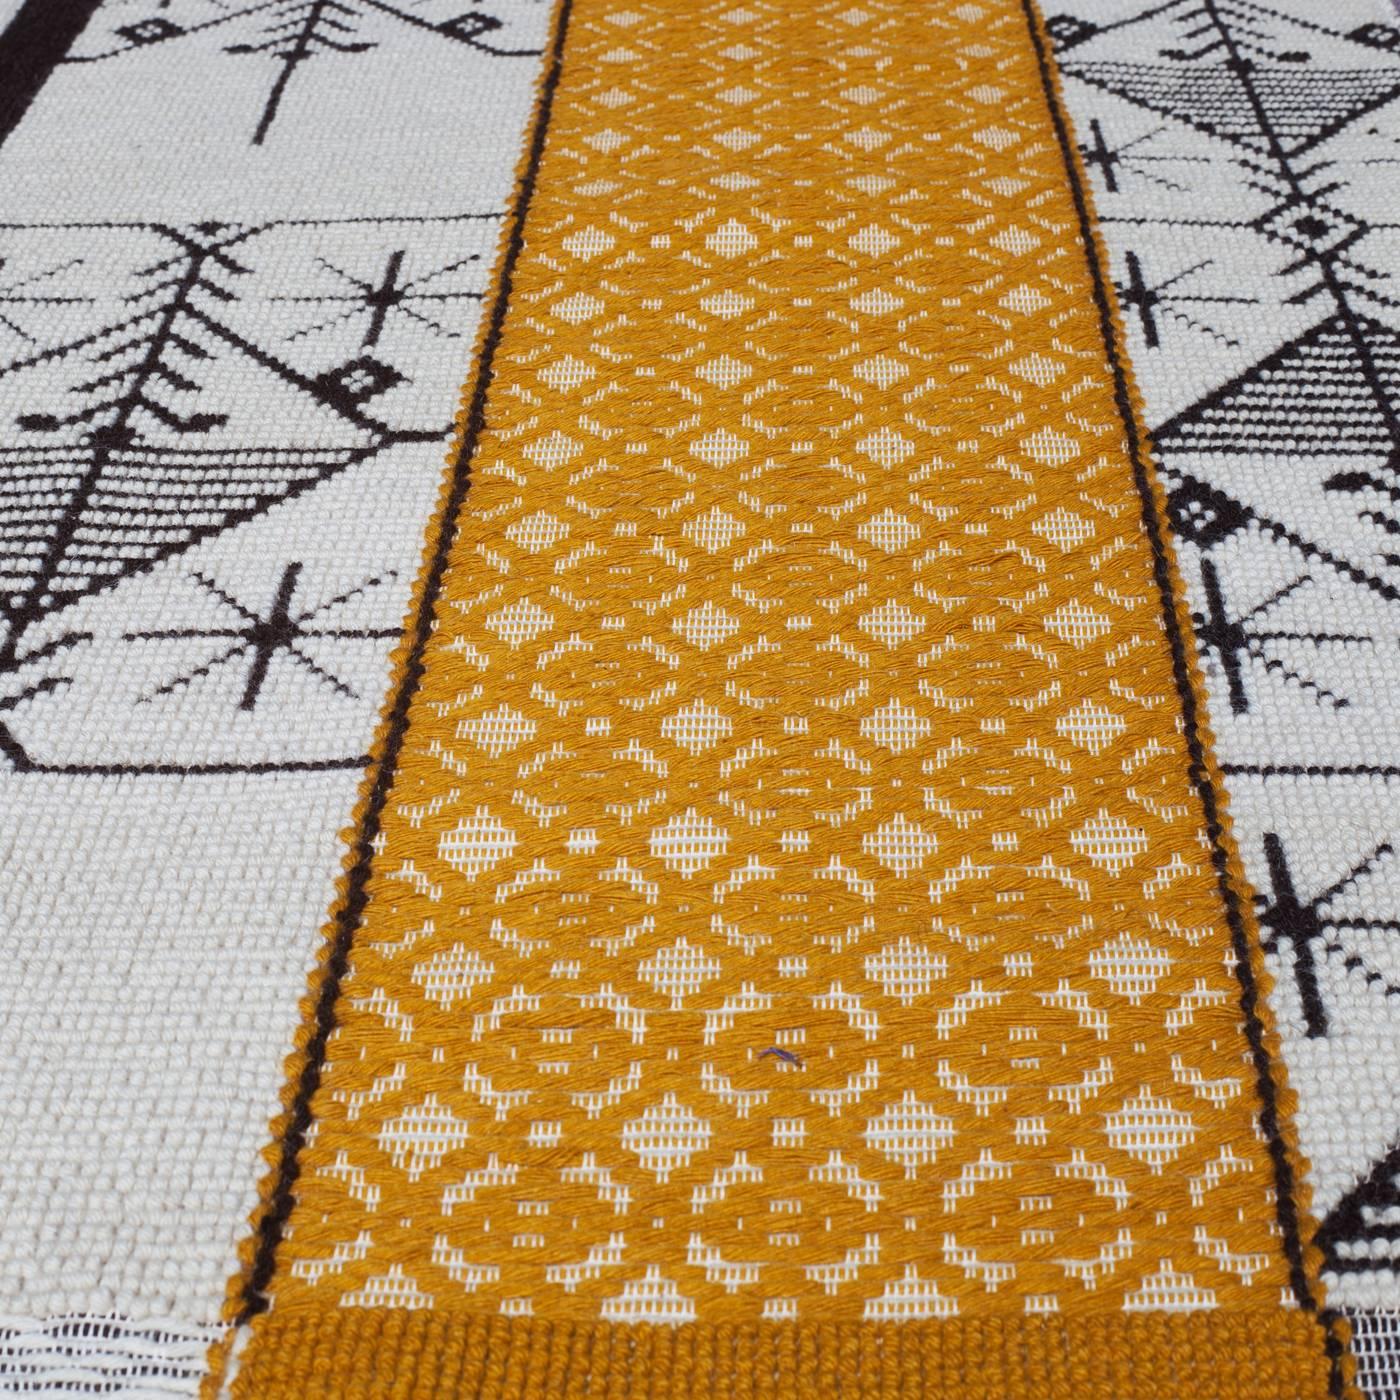 Expert hand craftsmanship was combined with the vision of the designer in this extraordinary work of art, also functioning as a rug. The graphic elements forming geometric patterns on this piece are complemented by the softness of the wool yarn and